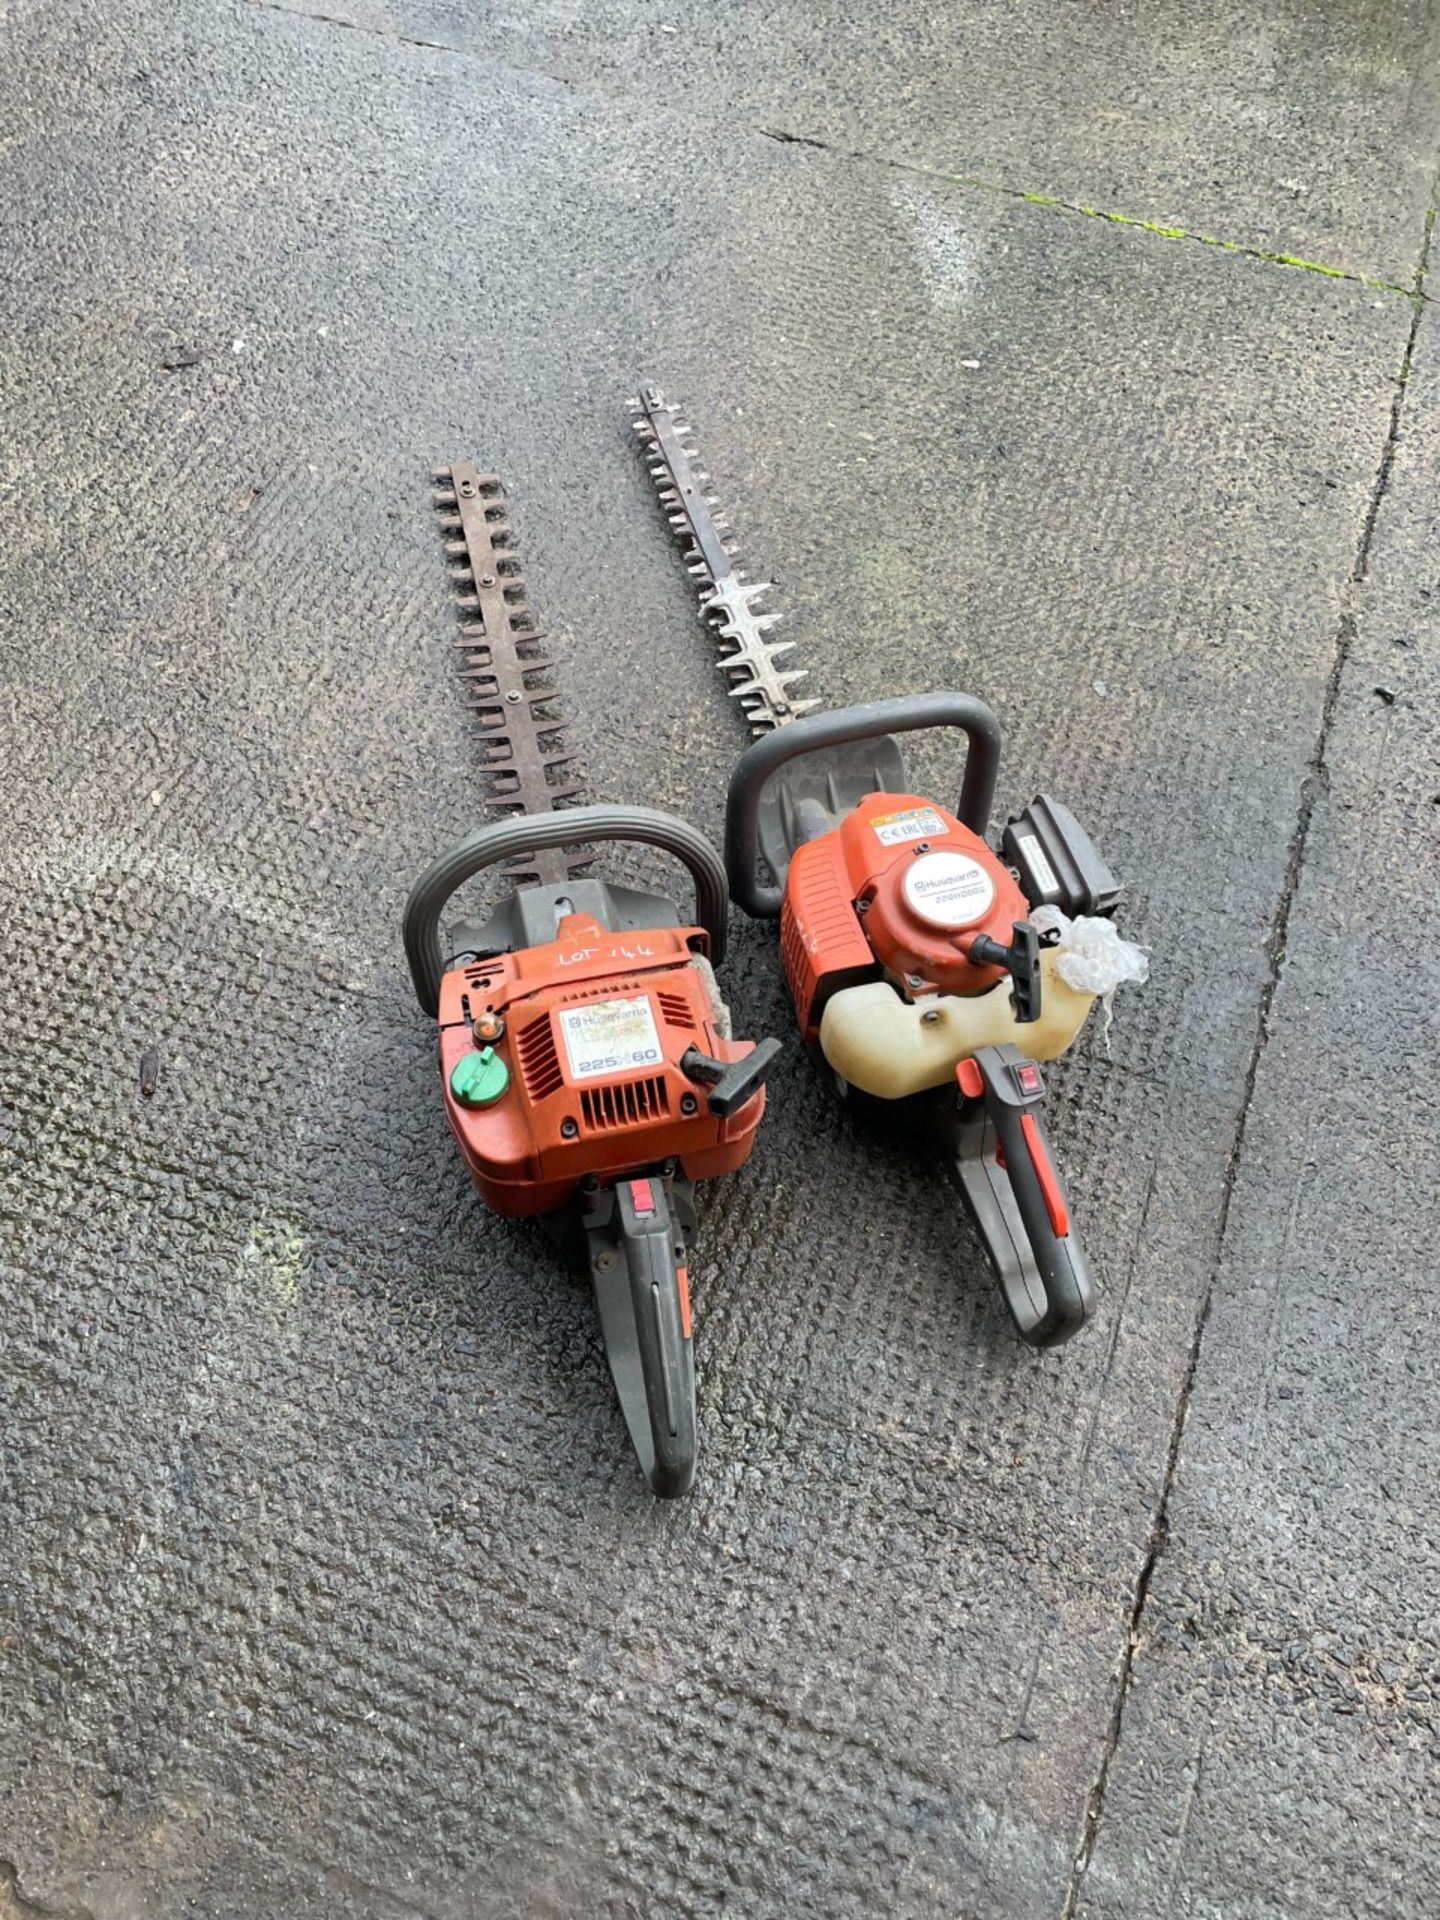 2x Husqvarna hedge cutters both spares or repair - Image 3 of 3